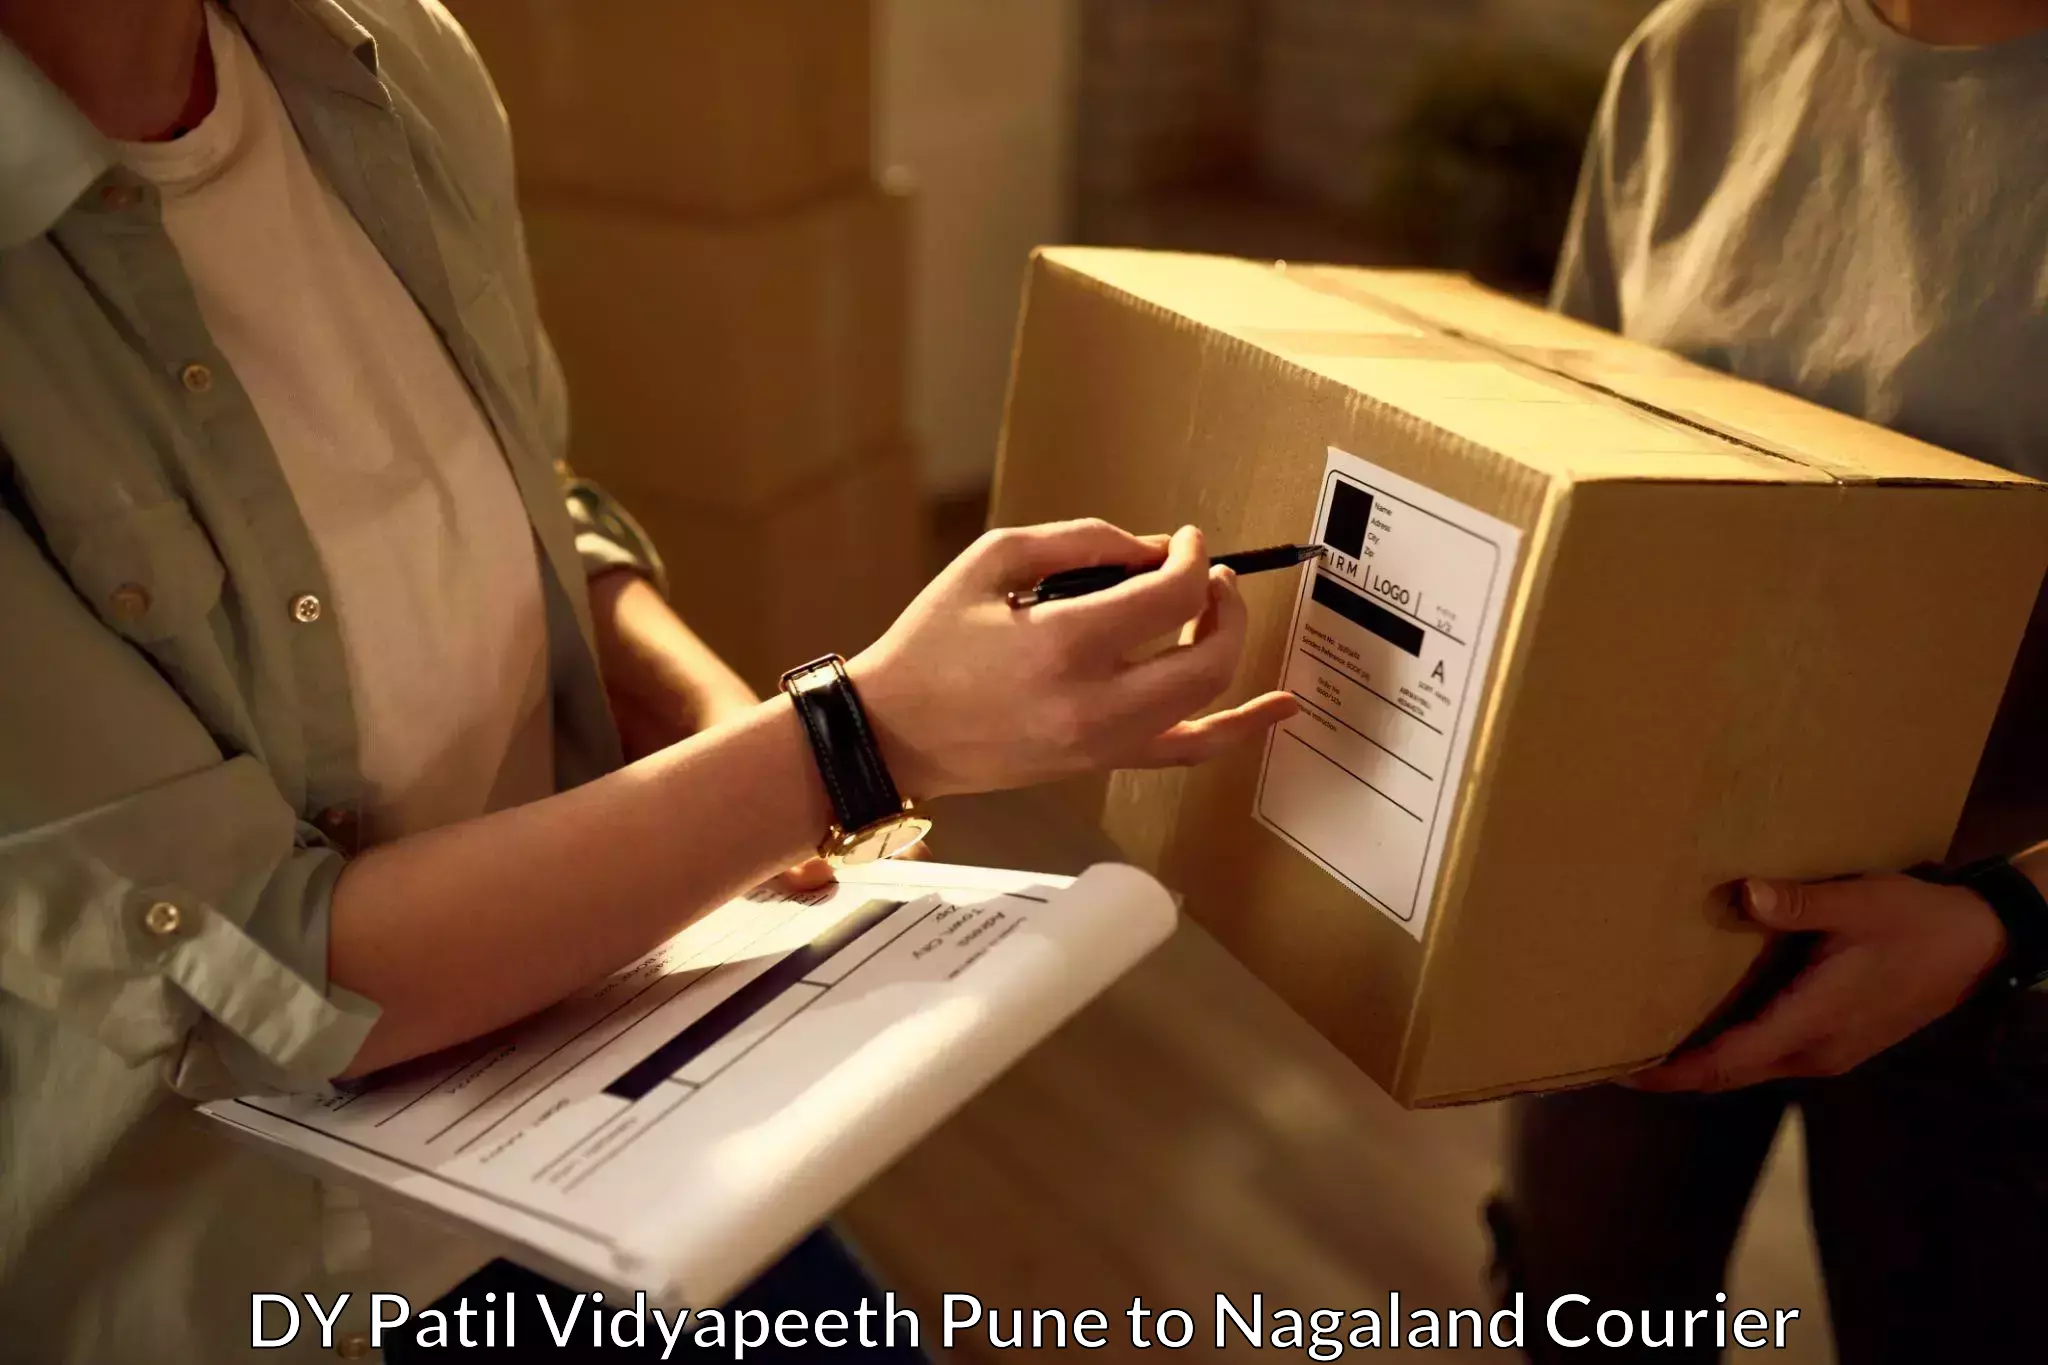 Customer-focused courier DY Patil Vidyapeeth Pune to Kohima